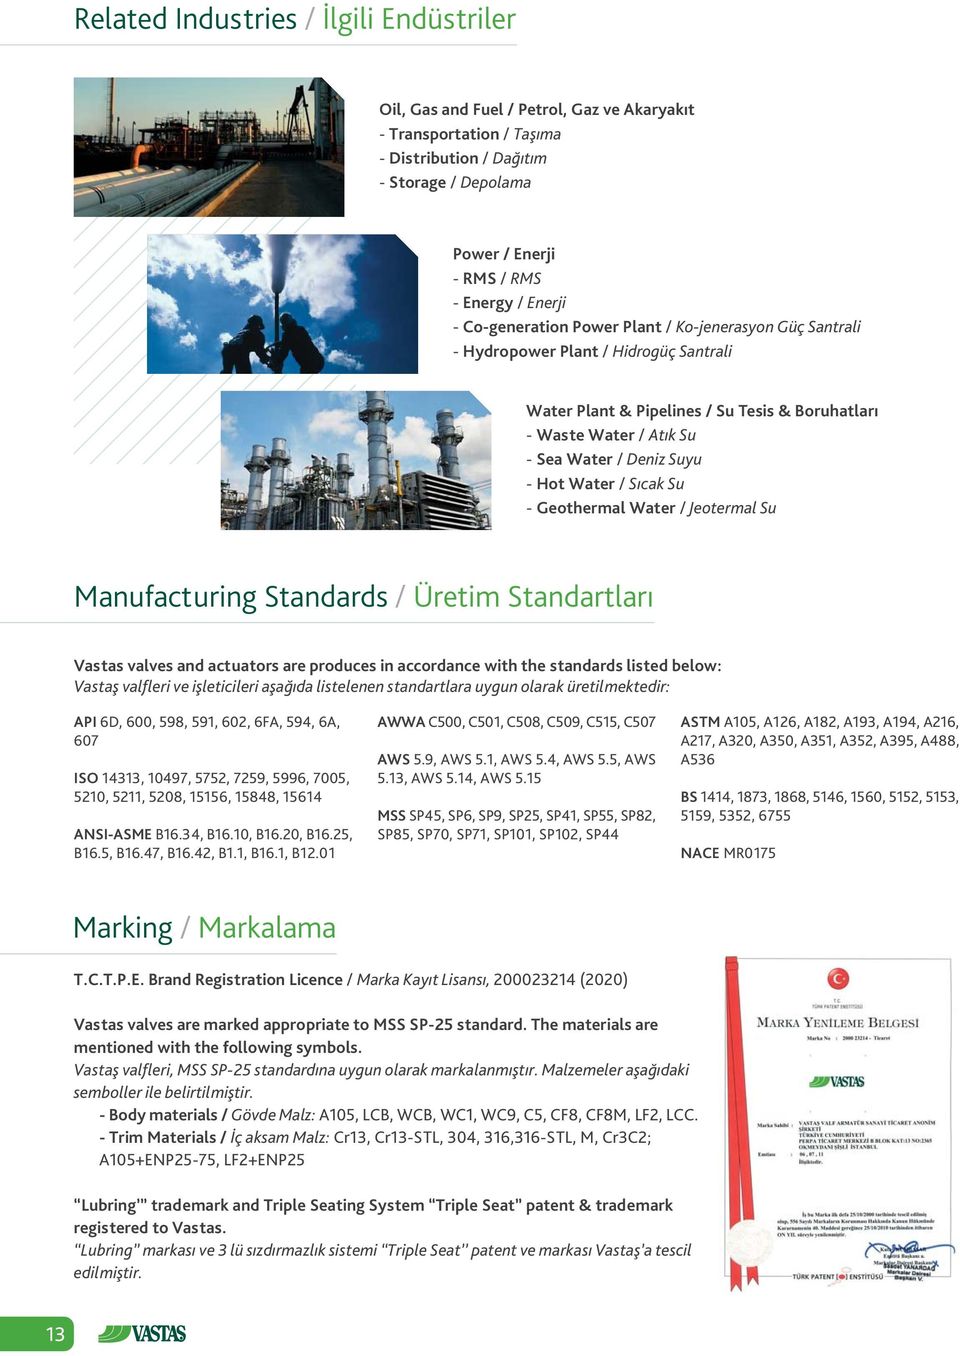 Suyu - Hot Water / Sýcak Su - Geothermal Water / Jeotermal Su Manufacturing Standards / Üretim Standartlarý Vastas valves and actuators are produces in accordance with the standards listed below: